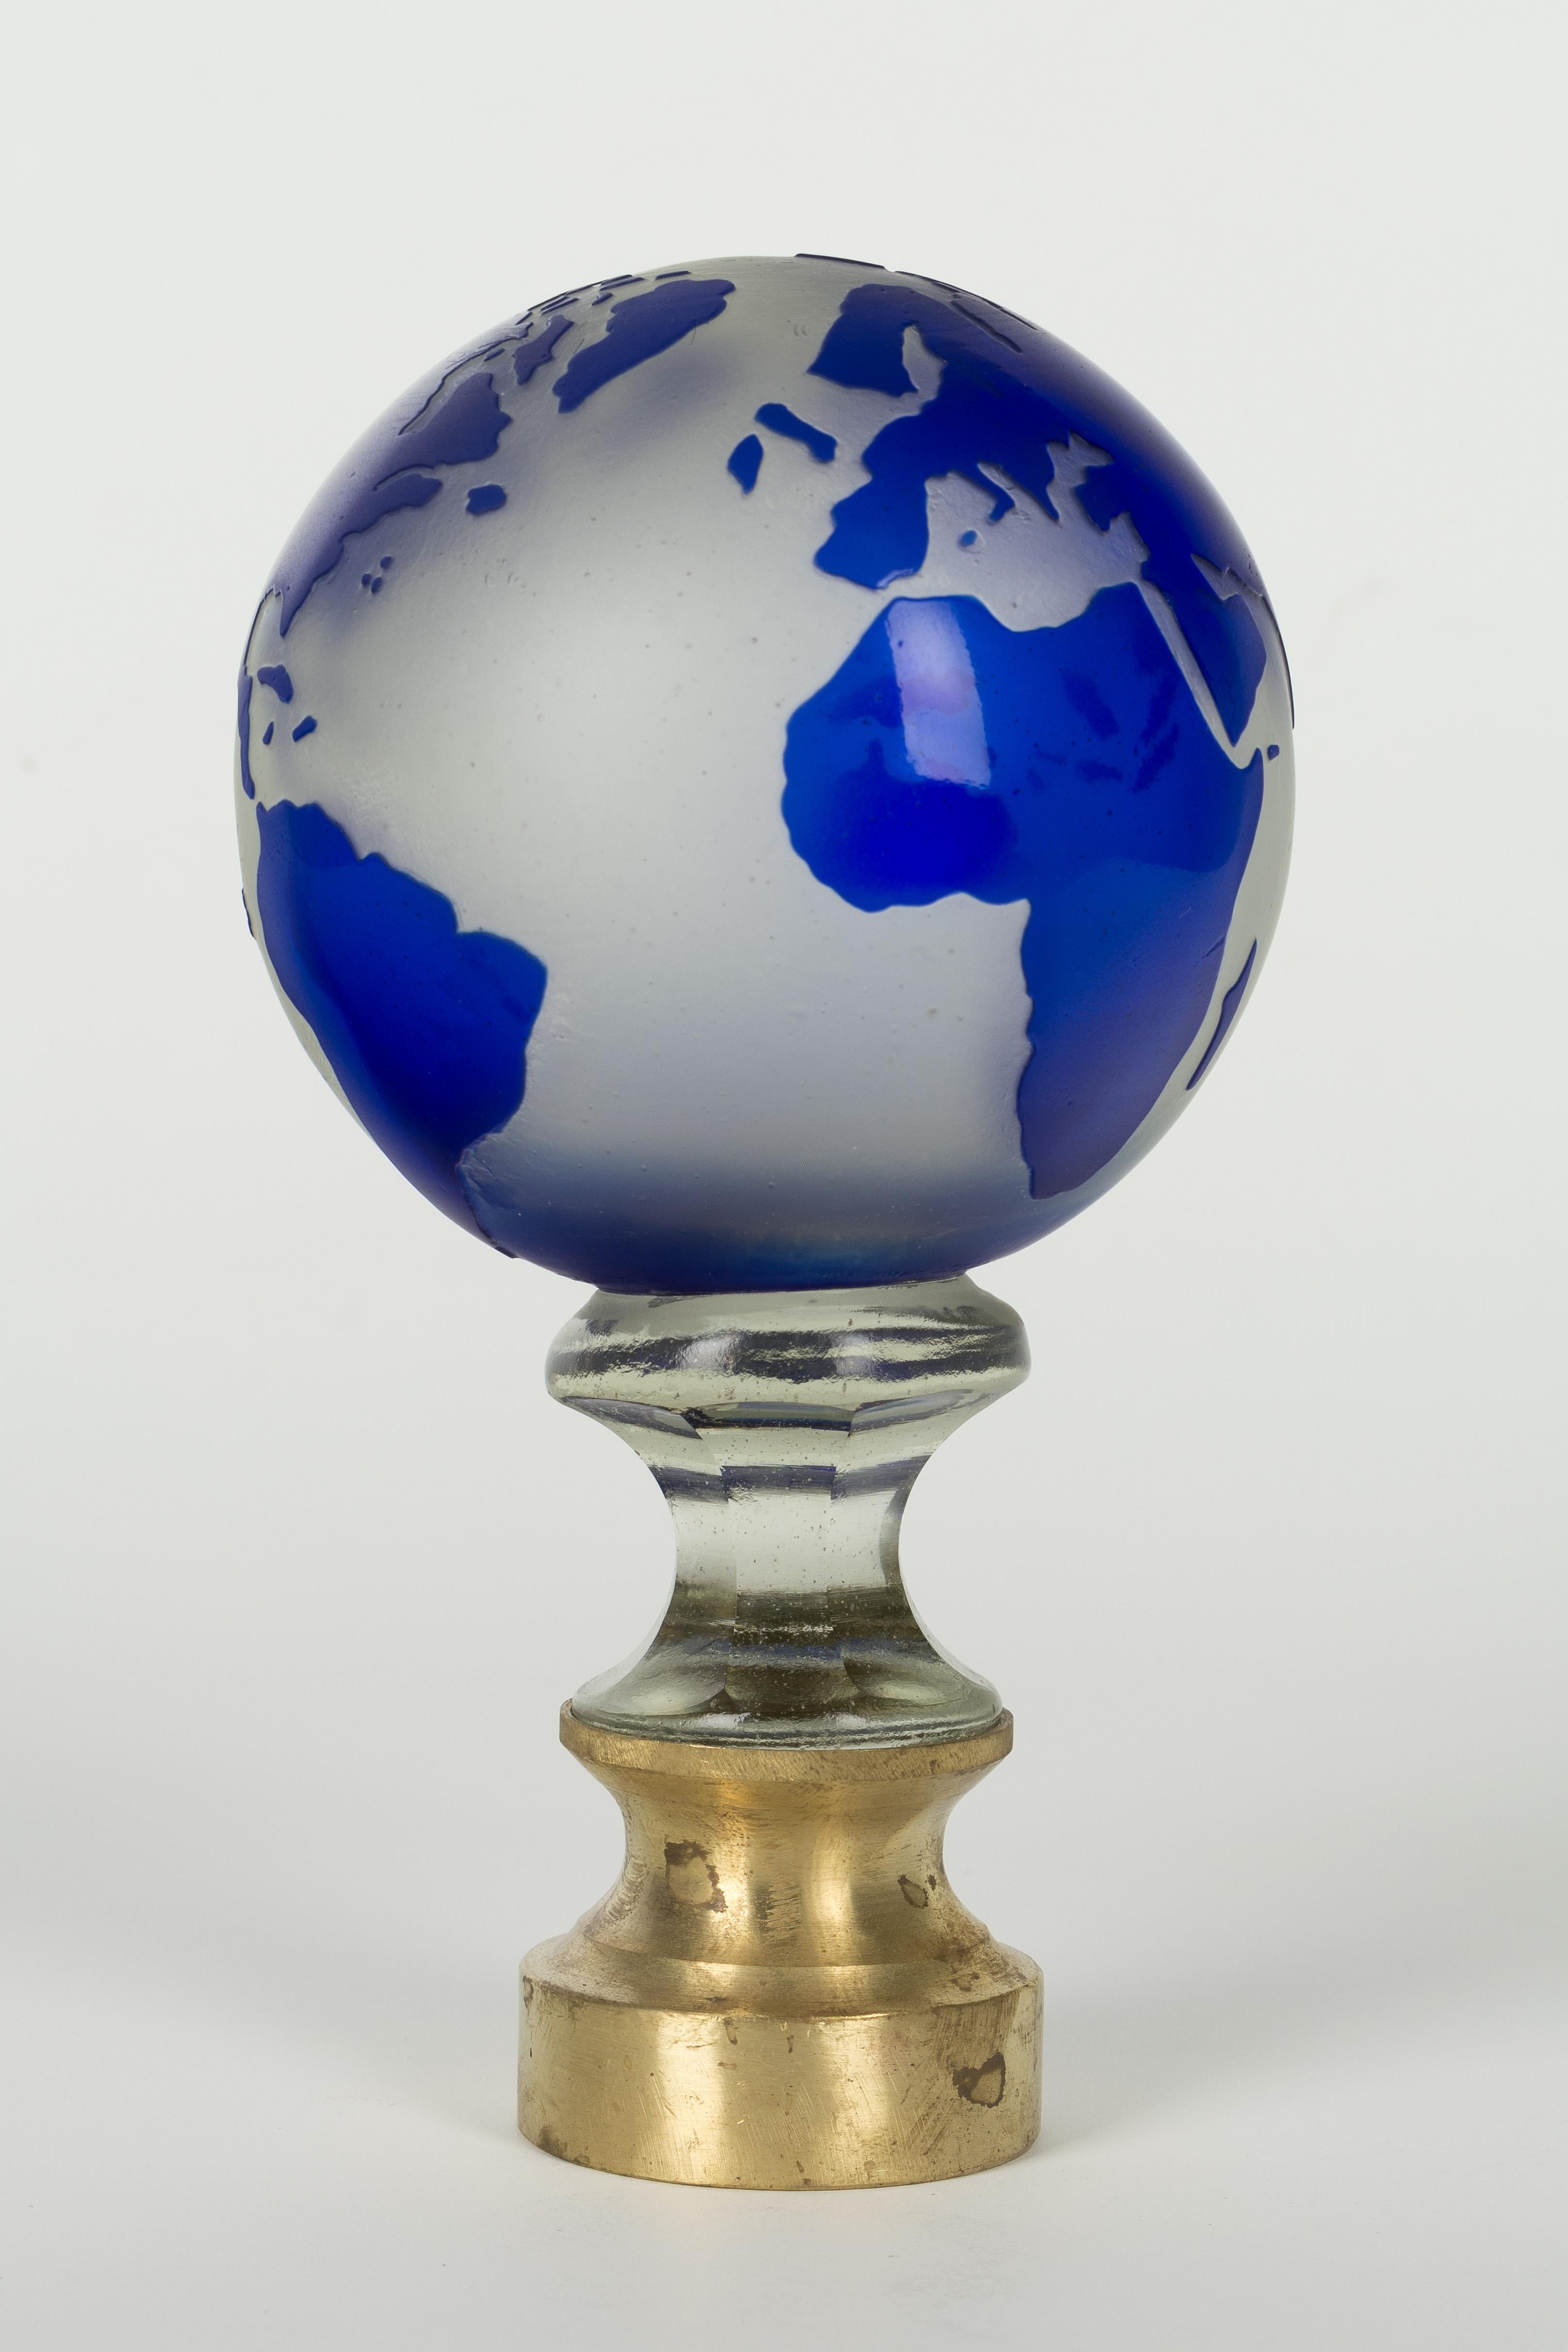 An early 20th century French glass globe newel post finial or boule d'escalier. These wonderful finials were used as decorative elements at the bottom of a staircase on the newel post. This one is made of two layers of cased glass with the cobalt